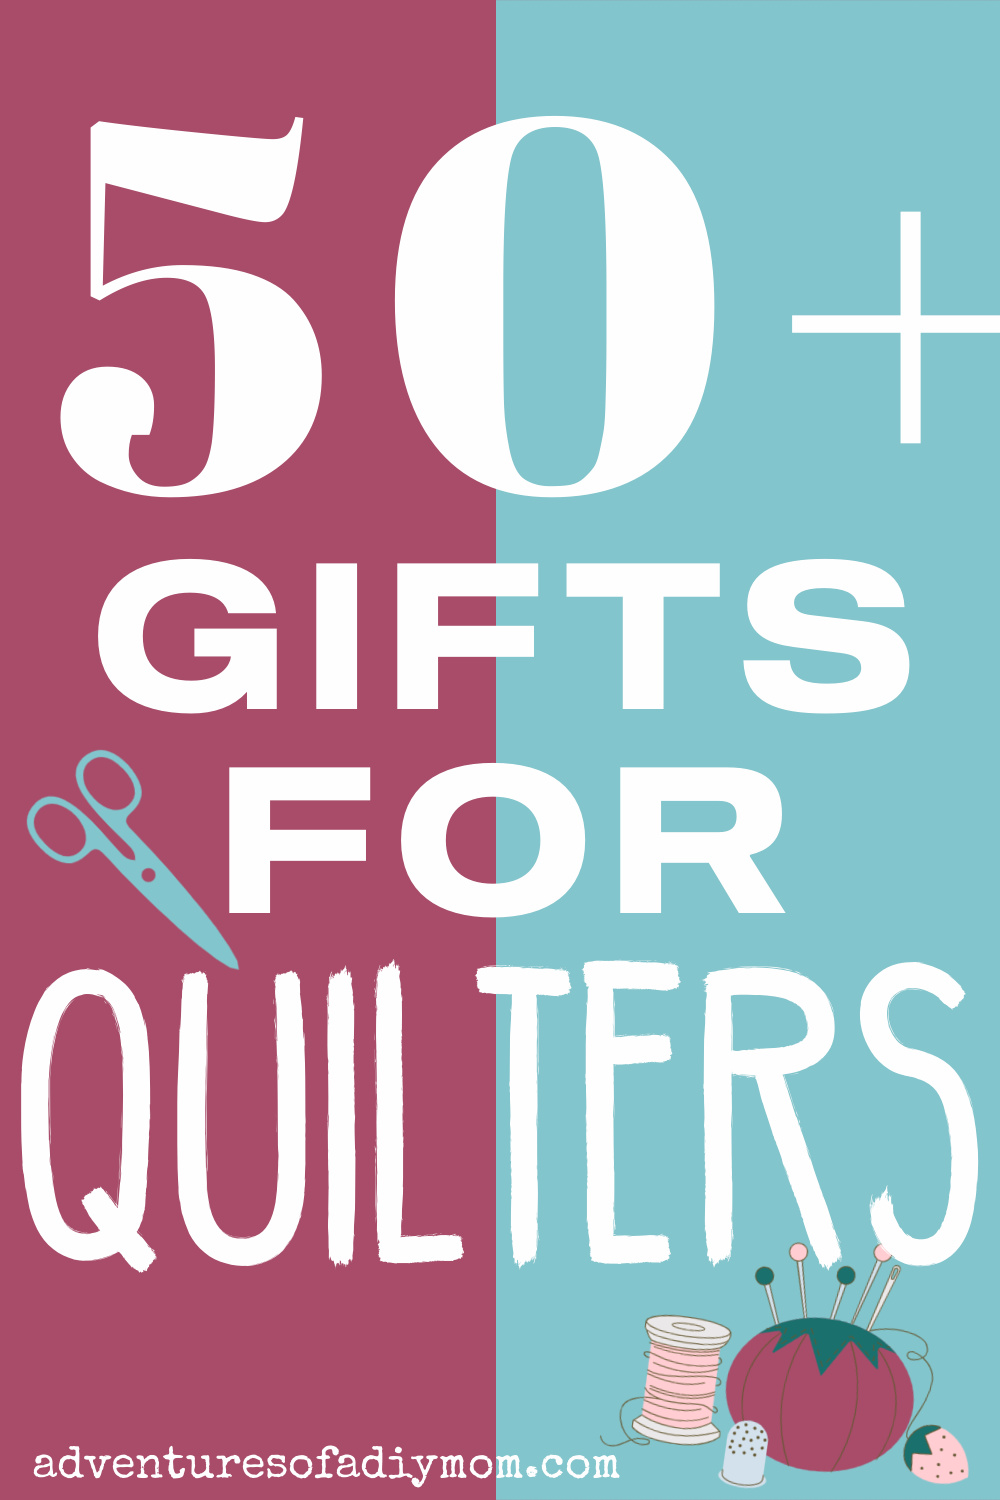 Quilter's Gift Guide: Awesome Gifts for the Quilter in Your Life